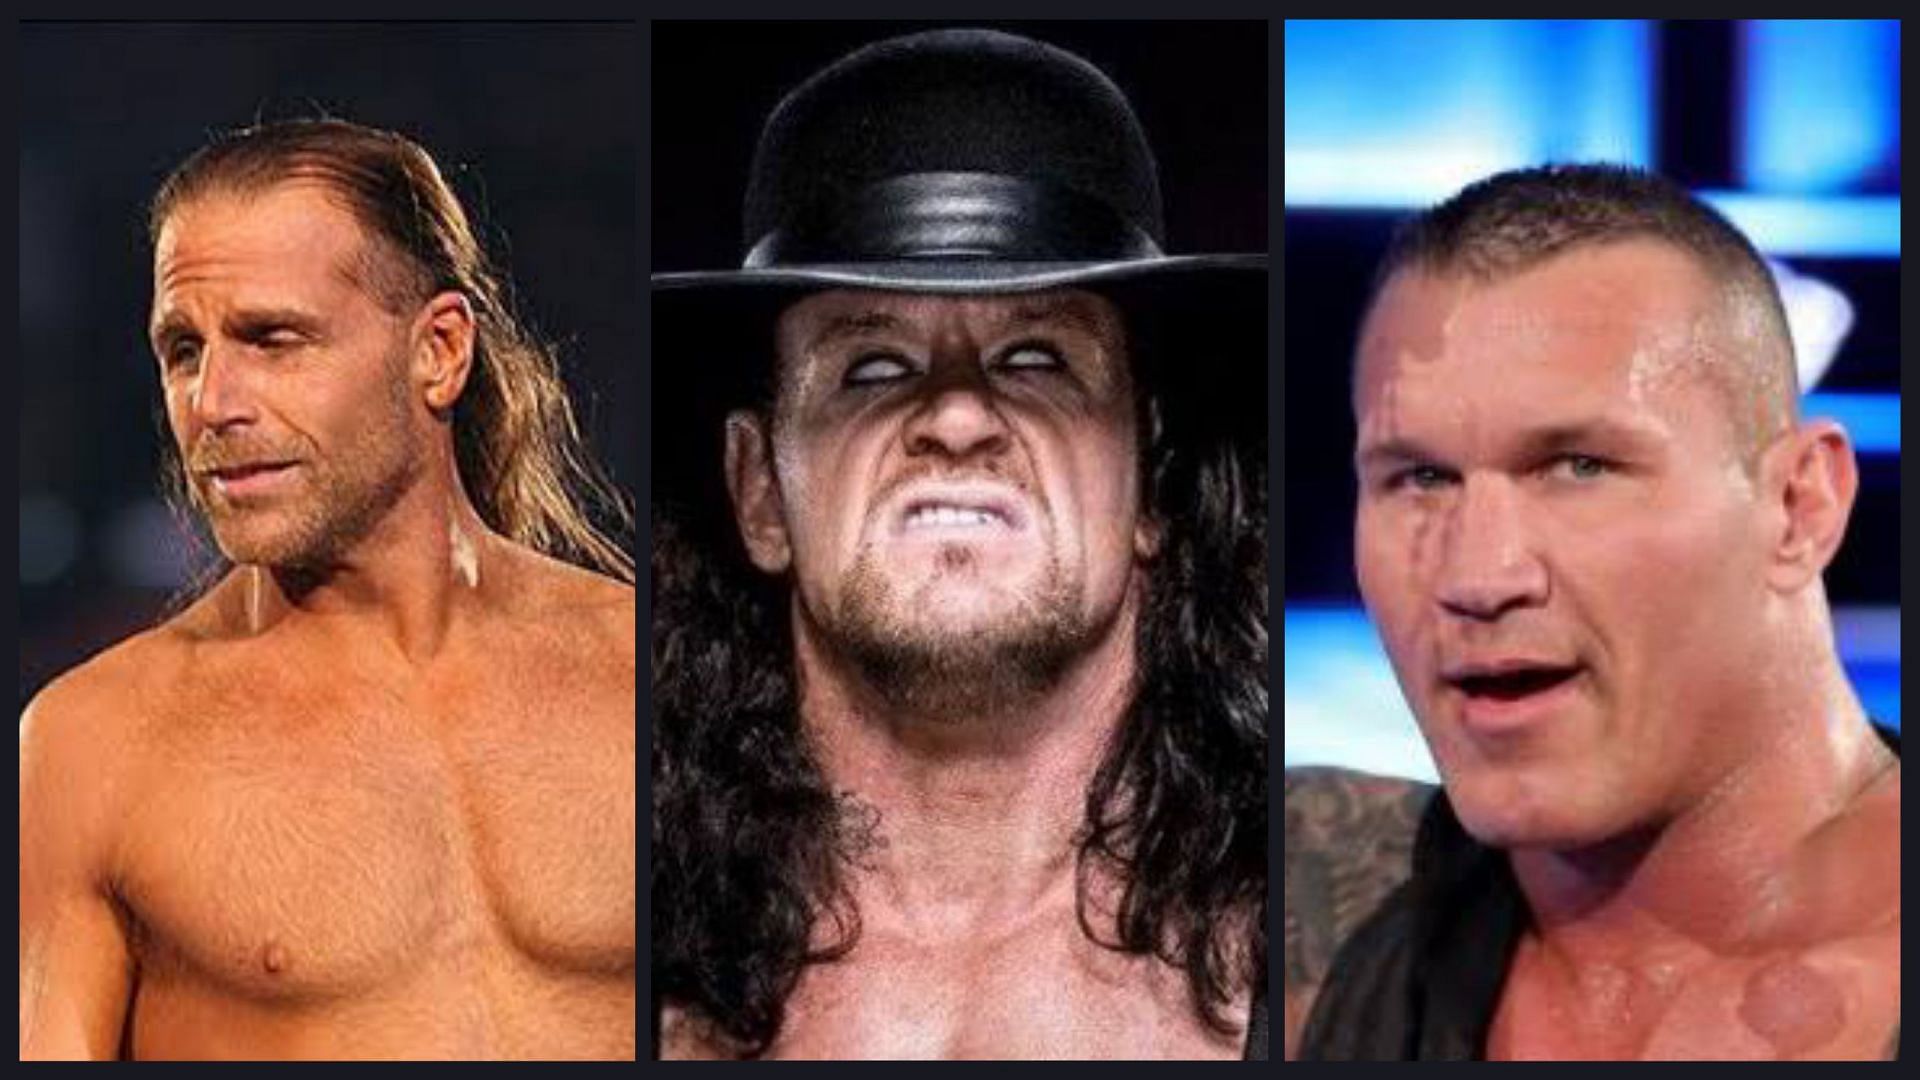 These WWE superstars love to perform at WrestleMania